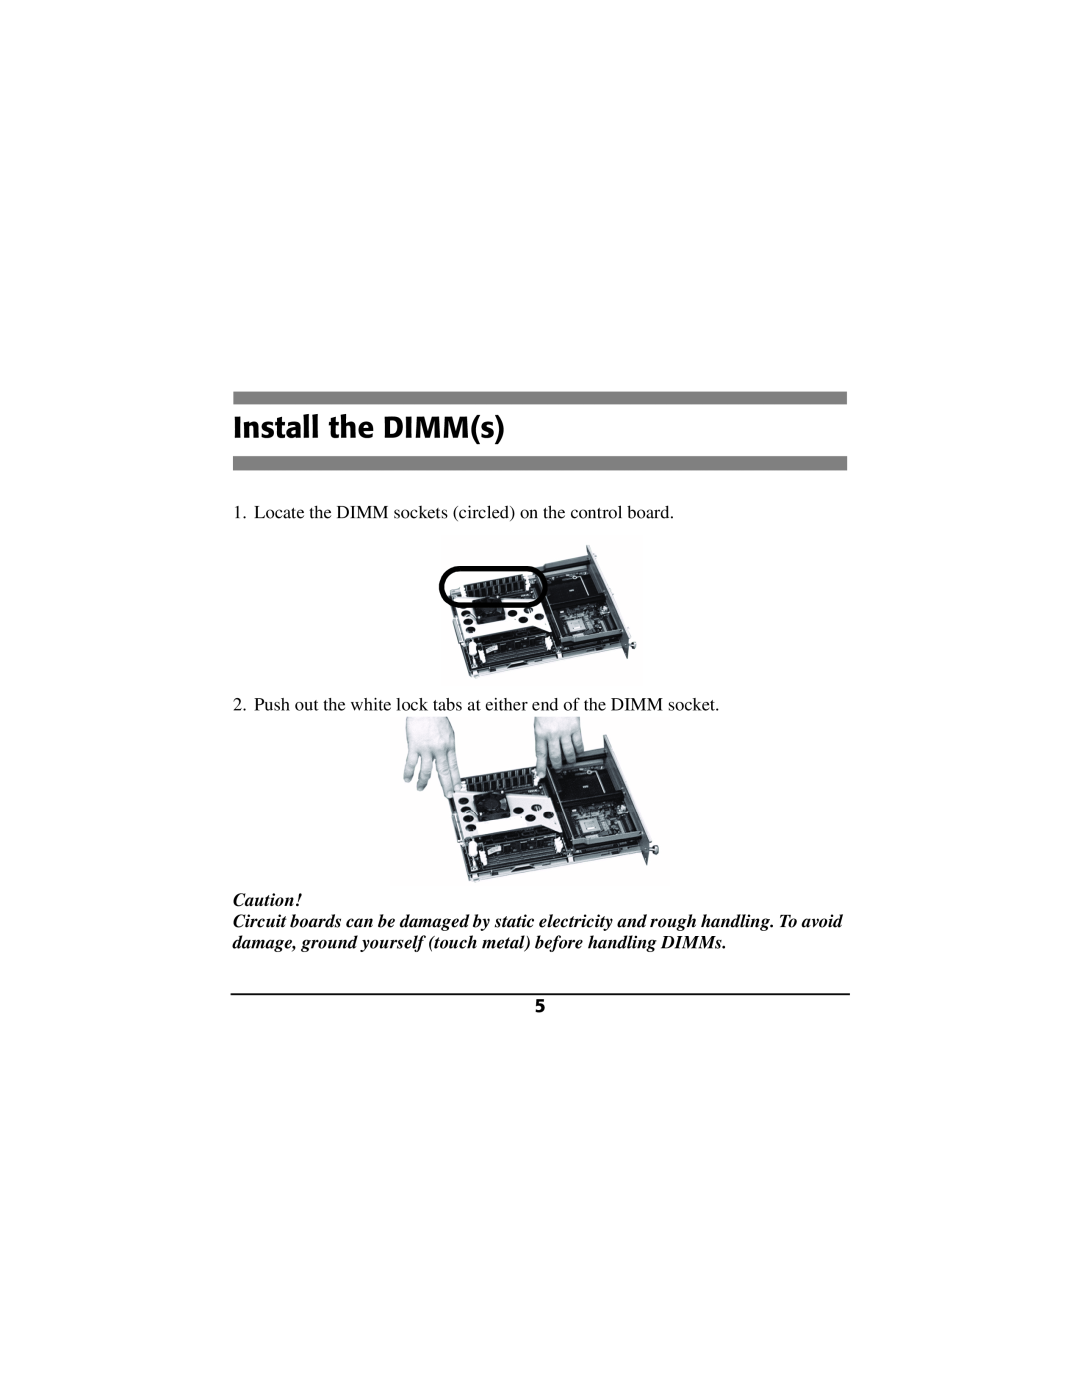 Oki 70040901 installation instructions Install the DIMMs 